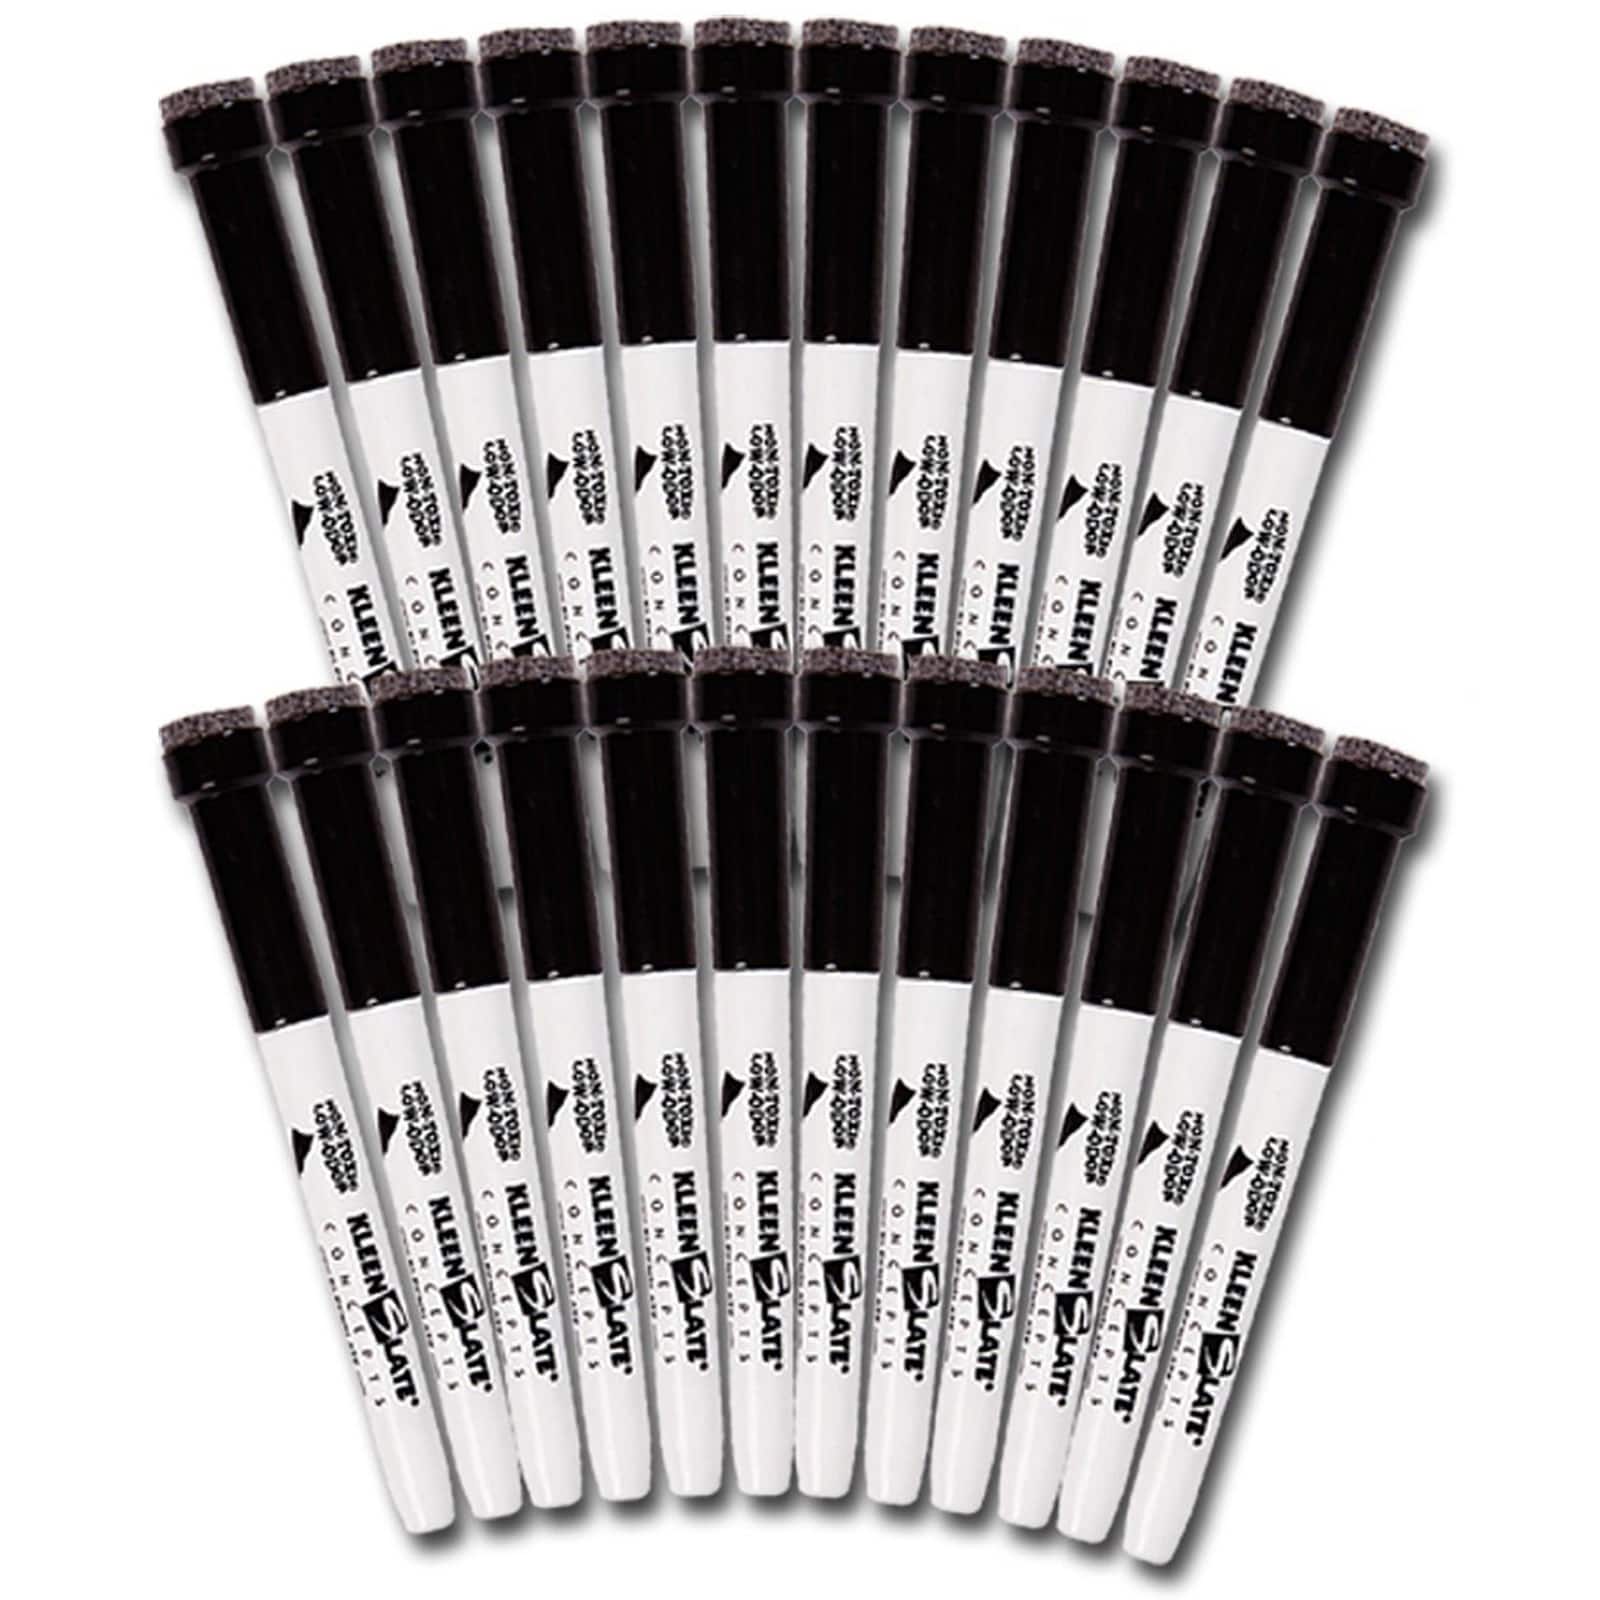 6 Packs: 24 ct. (144 total) KleenSlate&#xAE; Black Fine Point Dry Erase Markers with Erasers